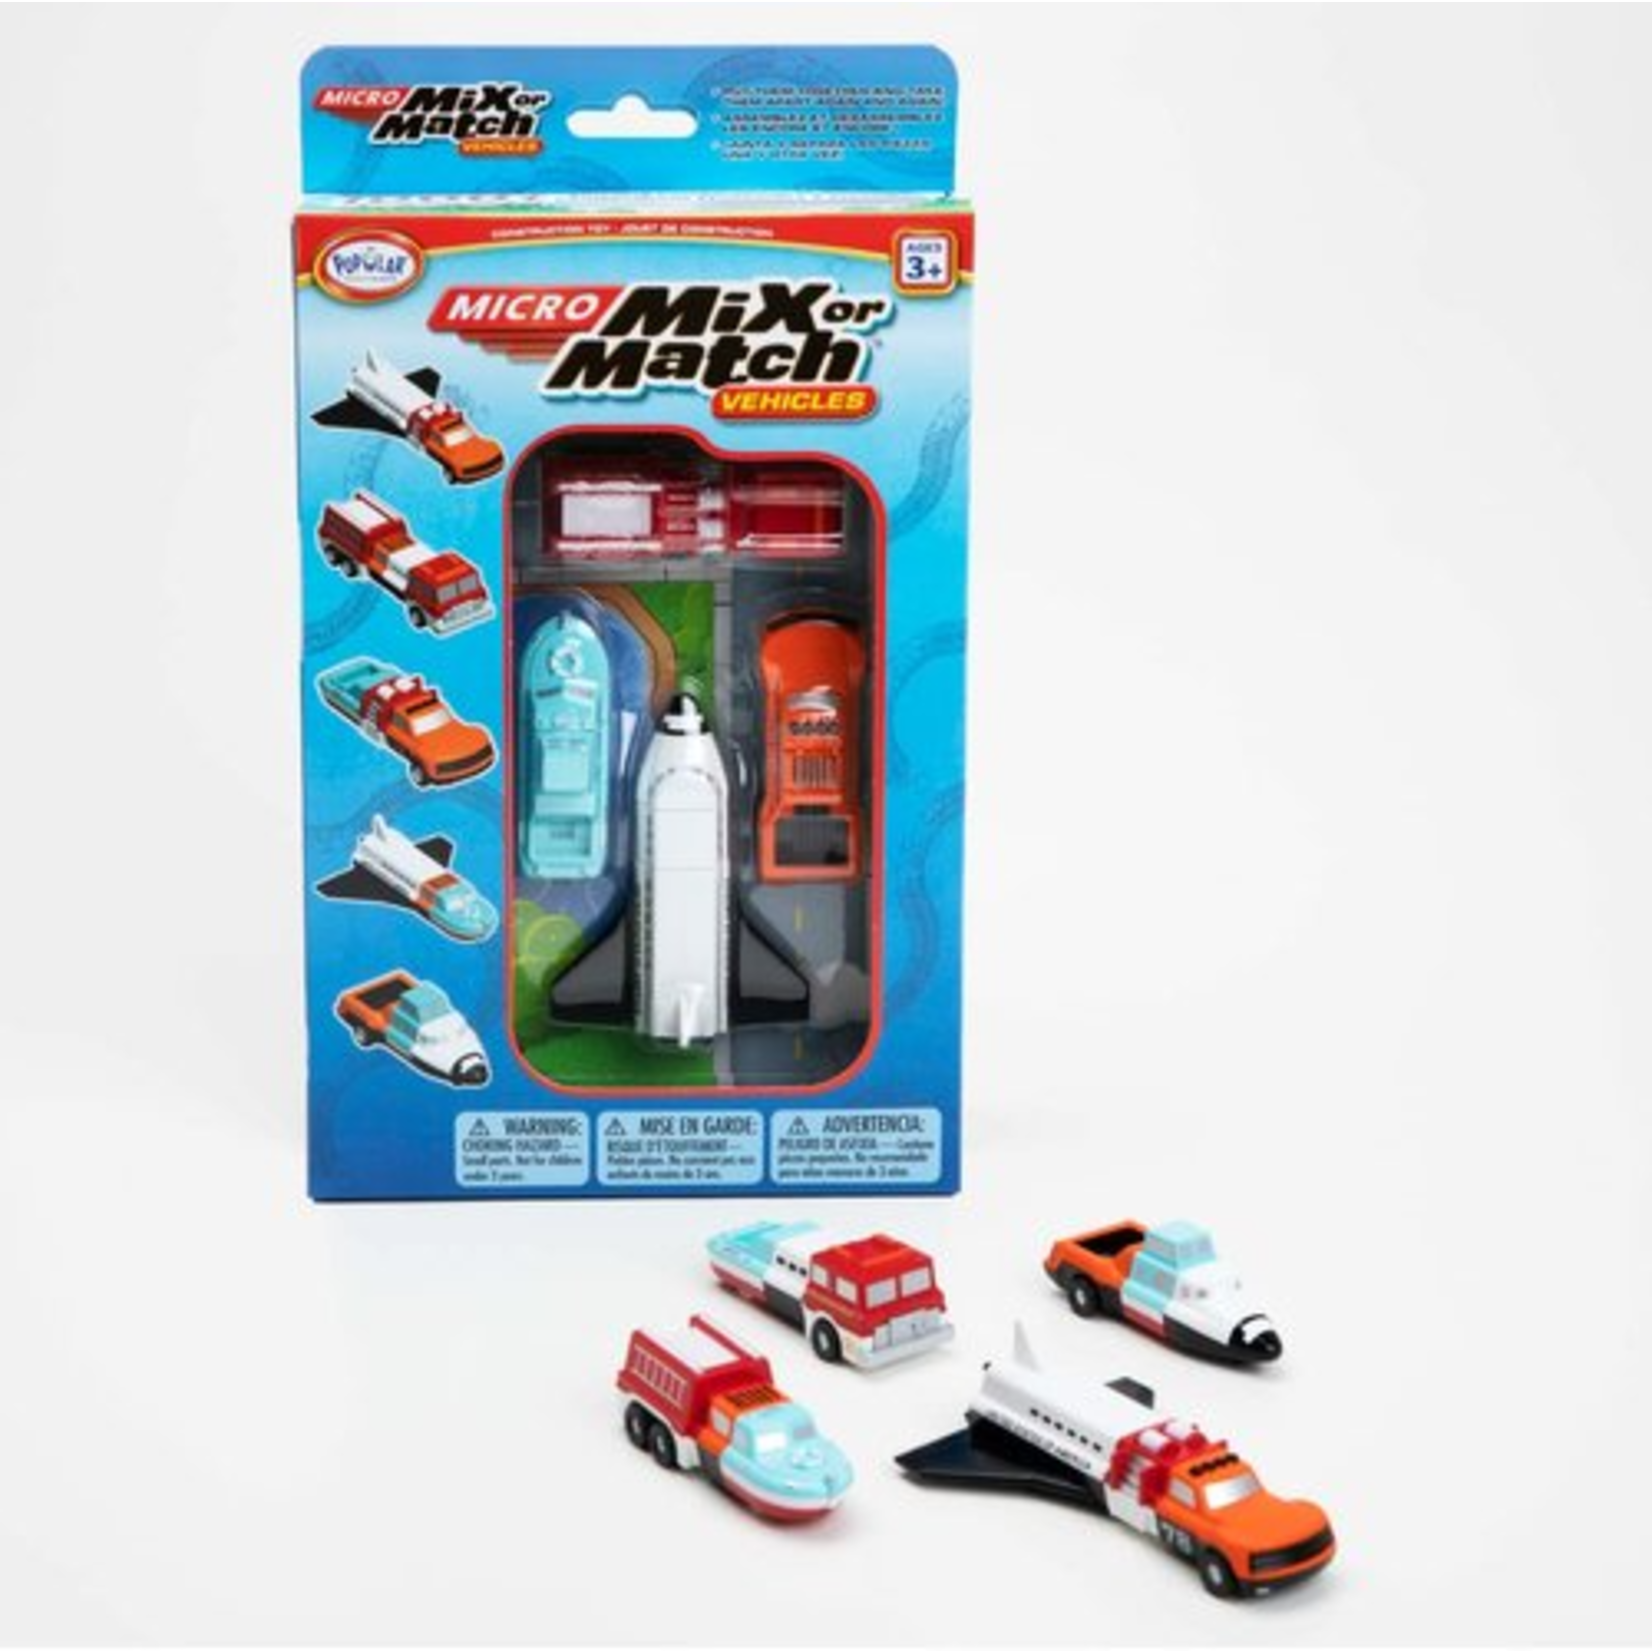 Popular Playthings Micro Mix or Match Vehicles - 4pc Blue